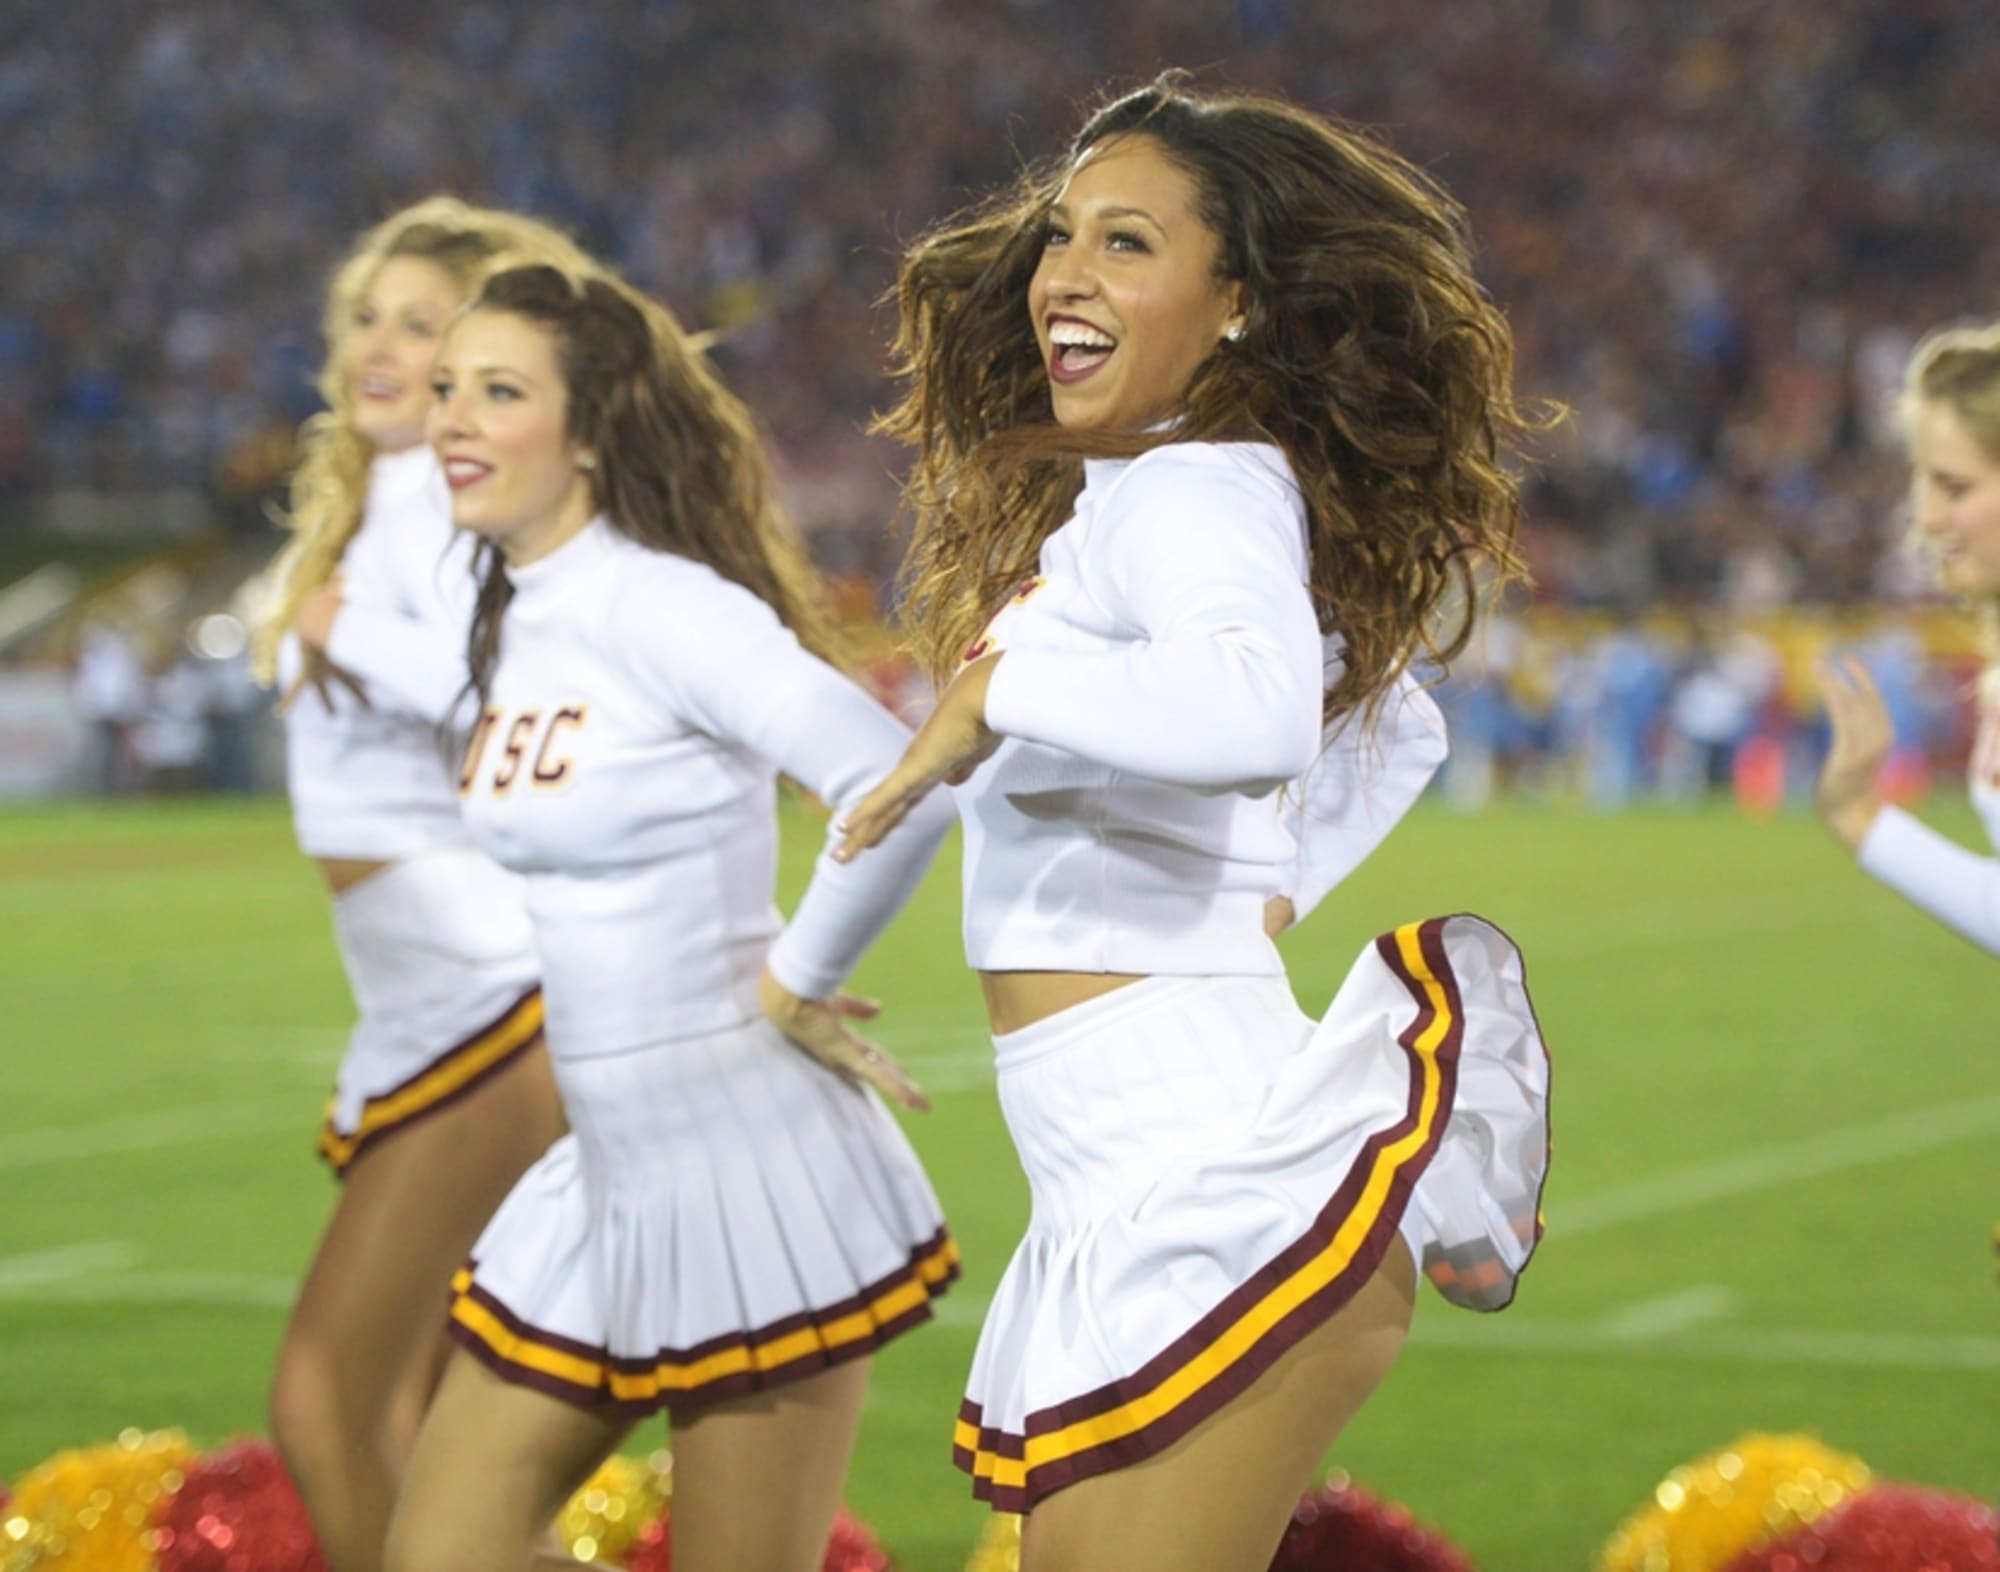 USC Cheerleader Gets Destroyed On Hit By Player (Video)